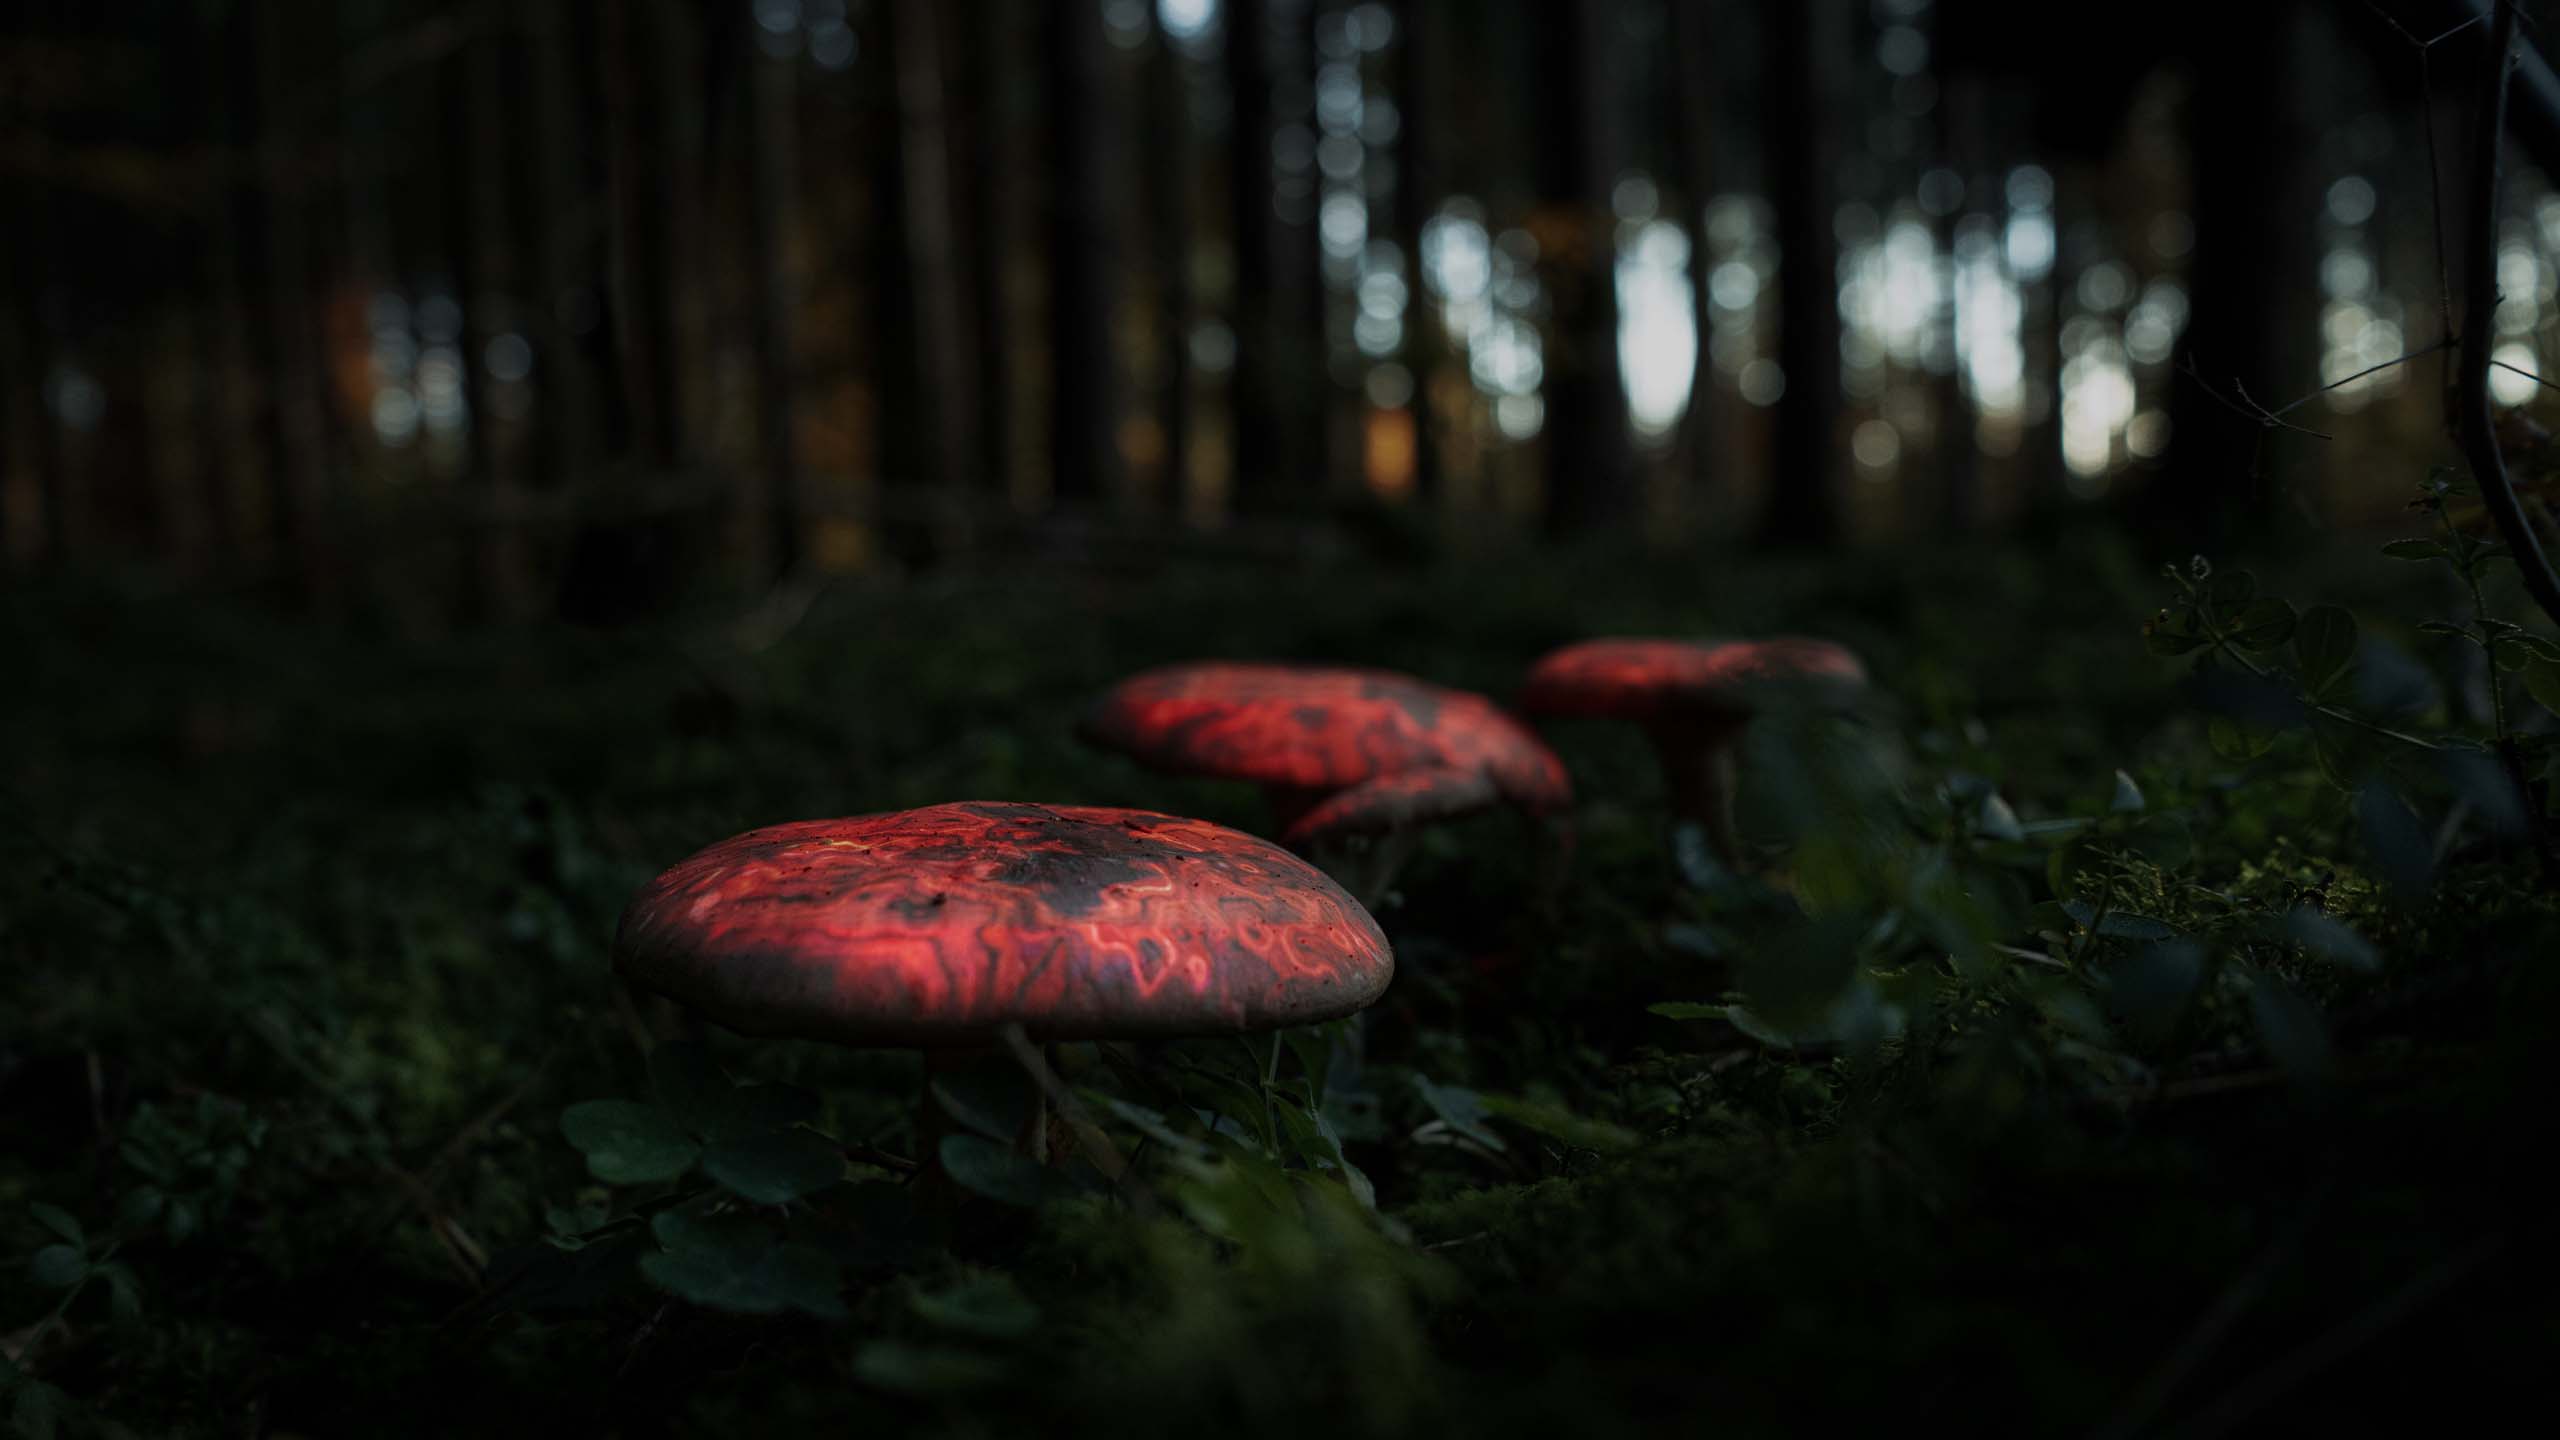 Video mapping in a forest on three Mushrooms with red geometric visuals